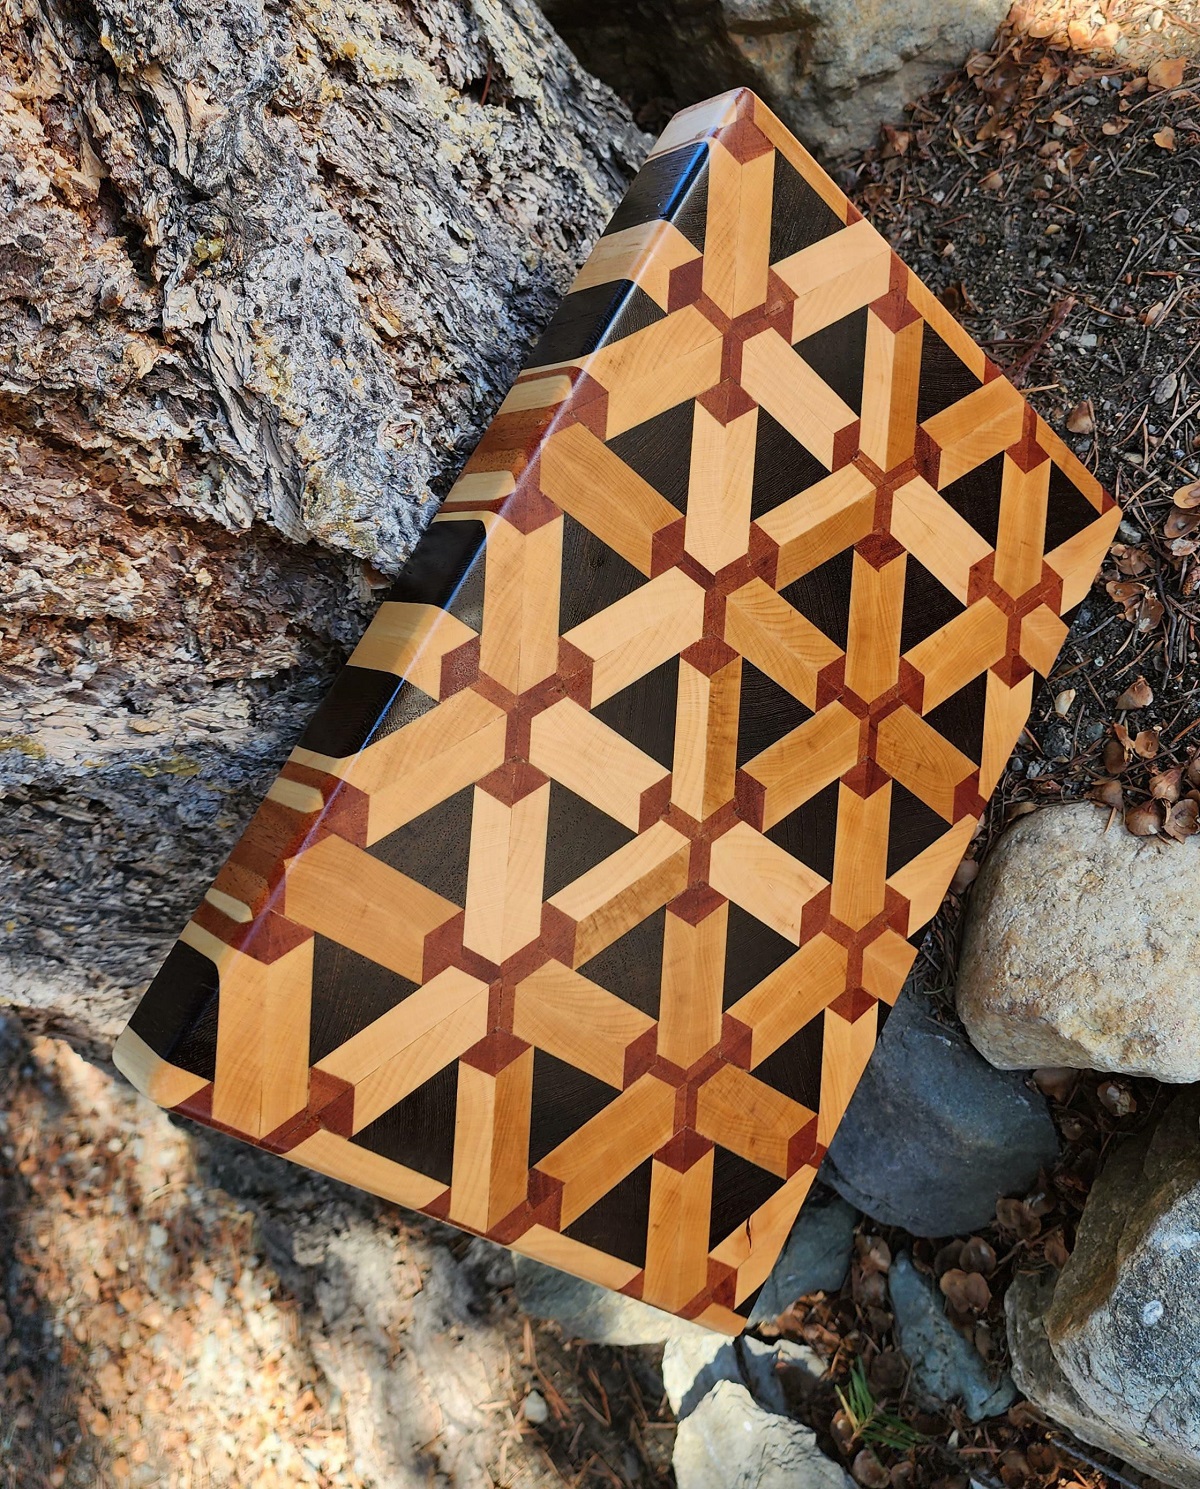 Here's An End-Grain Cutting Board I Made. It's My First Try At This Design. There Were A Few Issues, But The Next Batch Will Be Better. Wenge, African Mahogany And Hard Maple